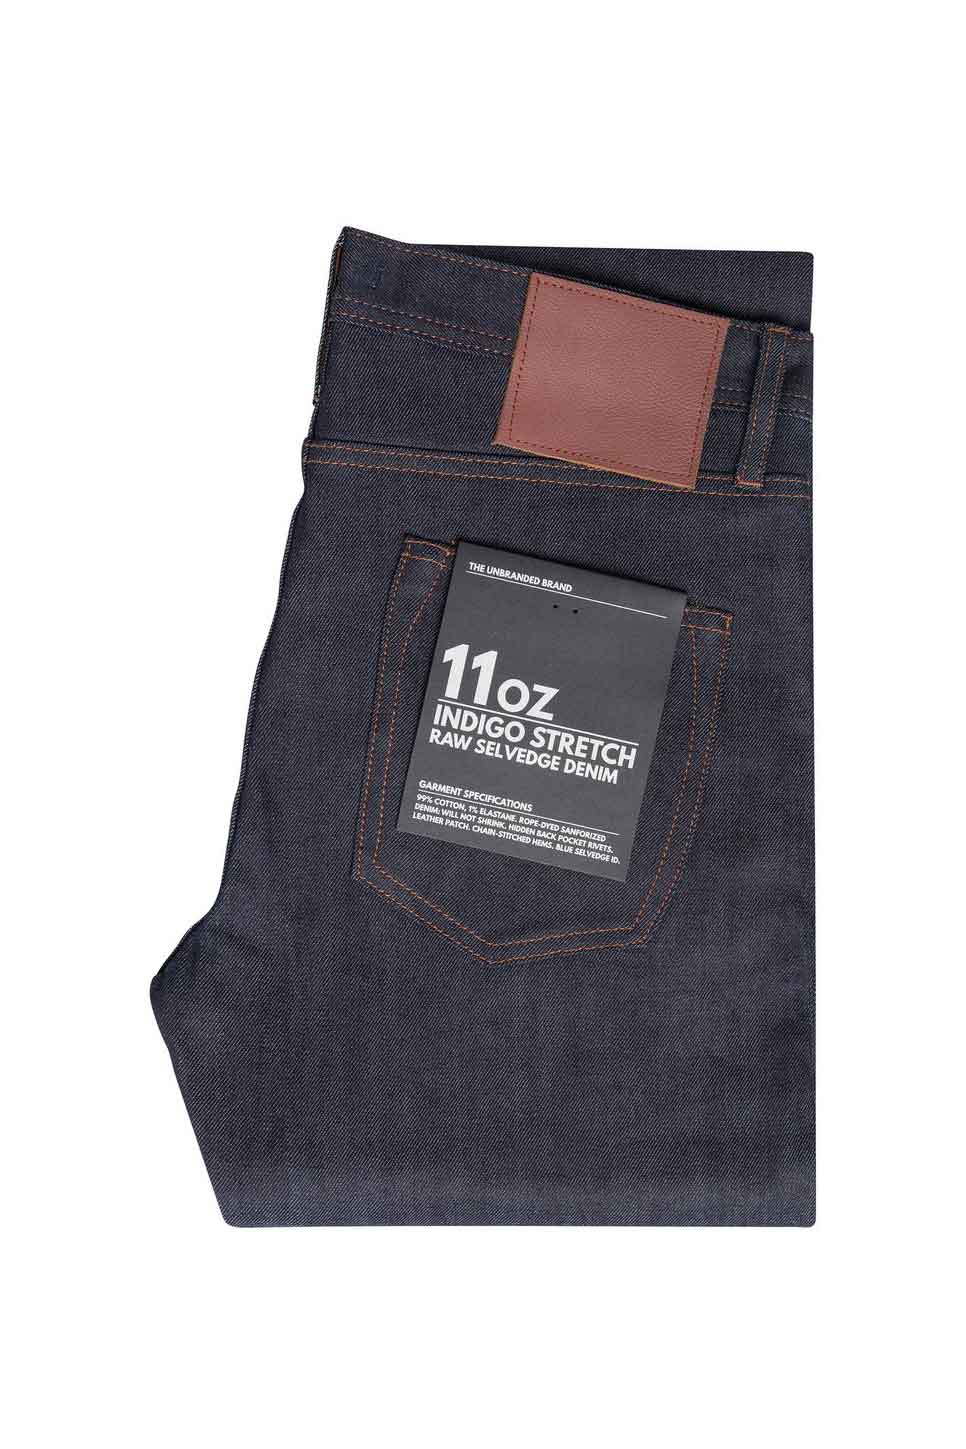 Unbranded - UB422 Tight Fit Stretch Selvedge - Flatlay